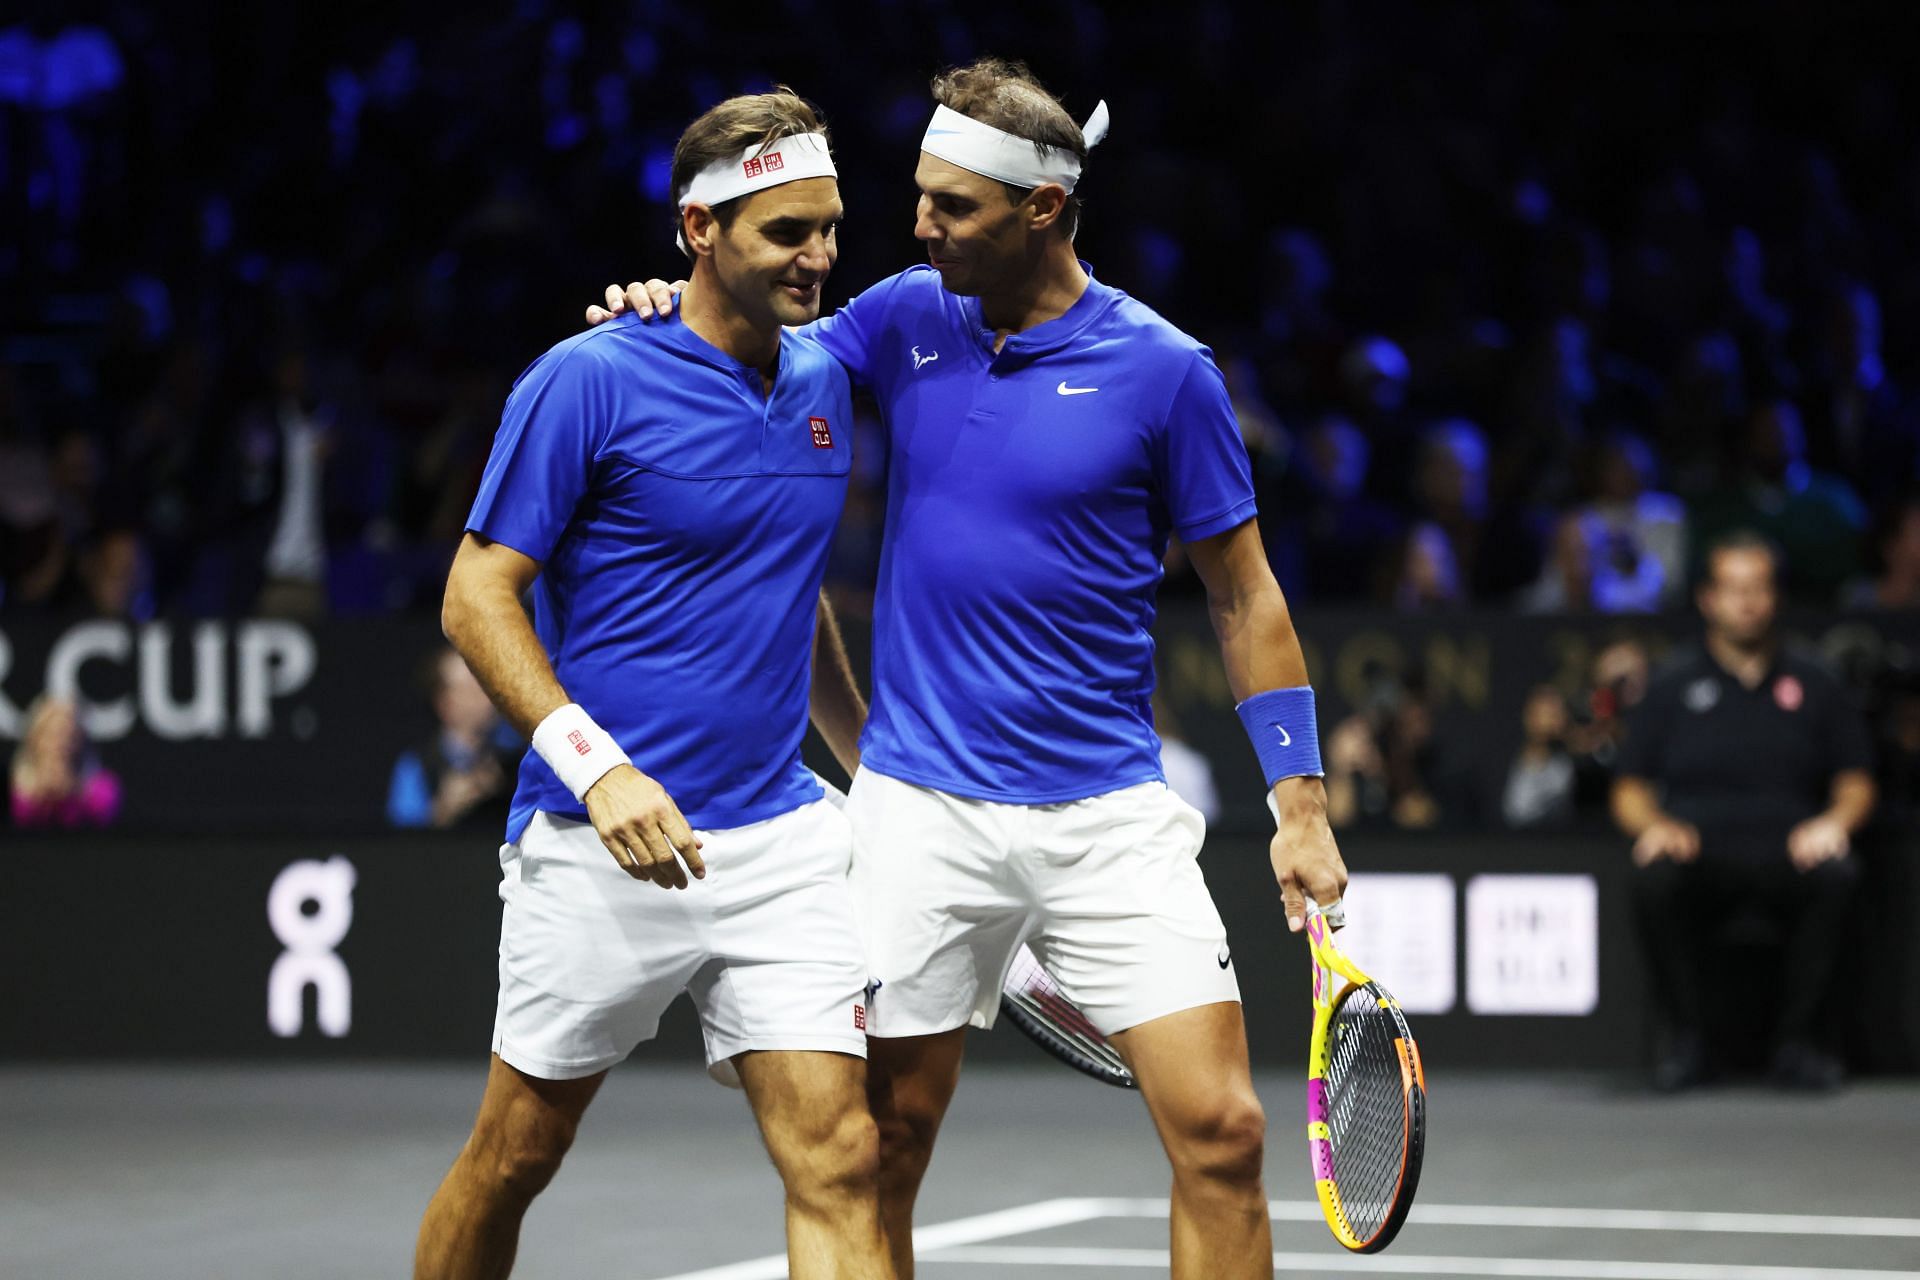 Roger Federer and Rafael Nadal pictured at the Laver Cup 2022 - Day One